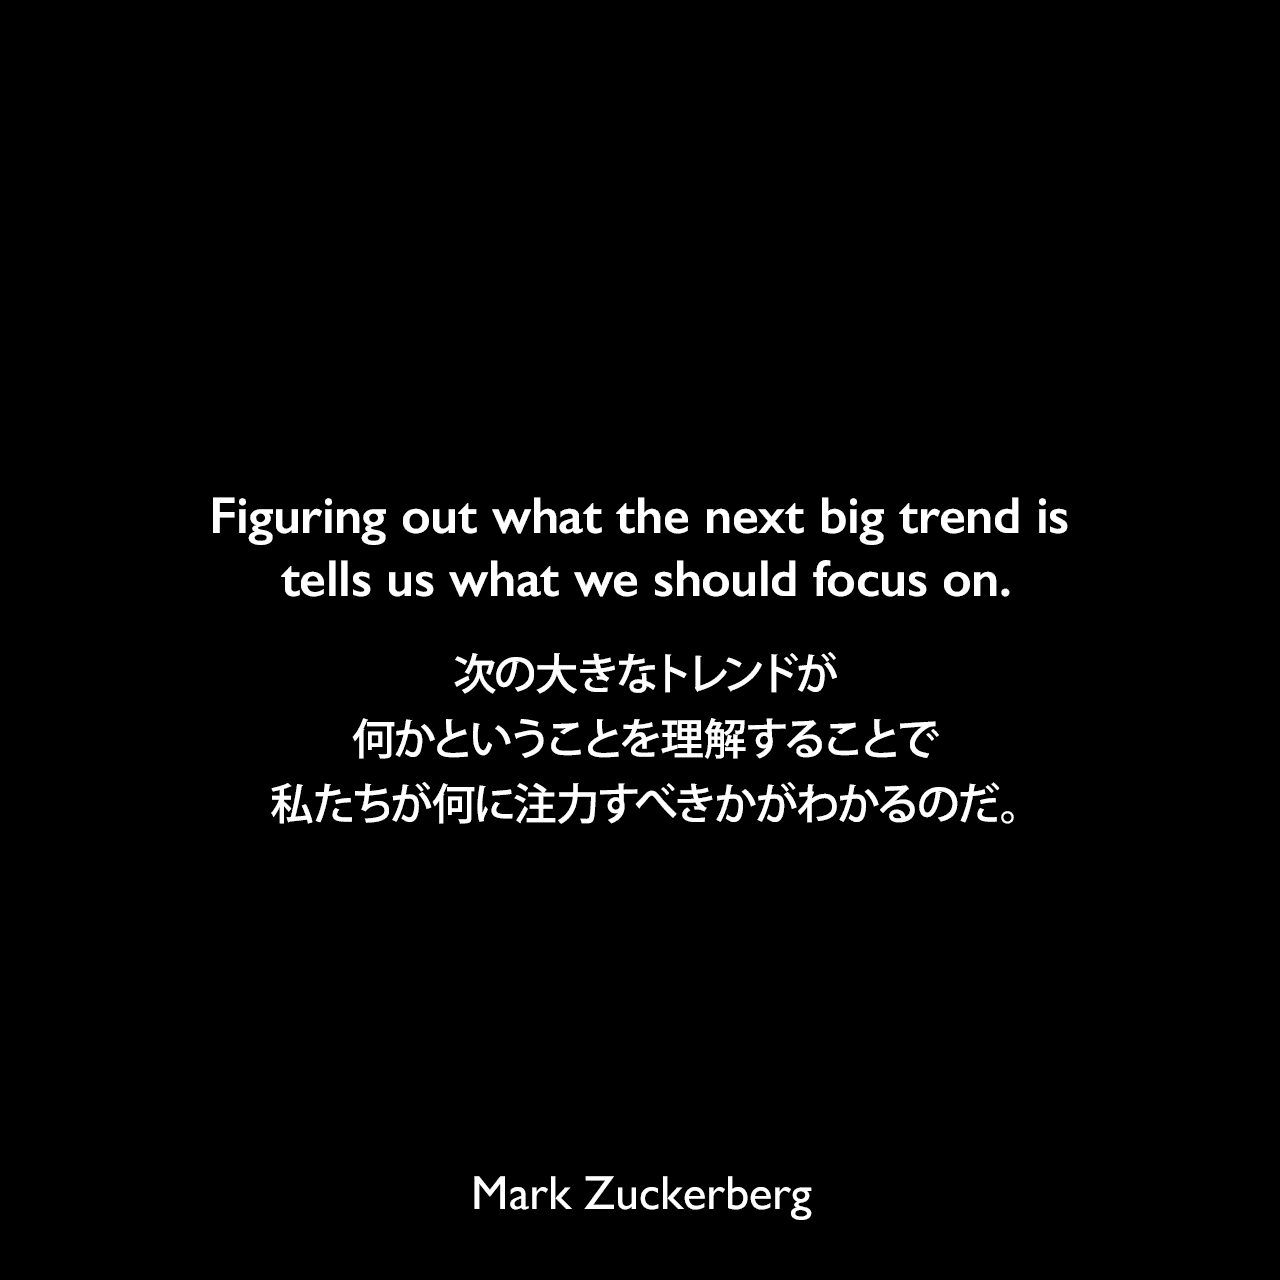 Figuring out what the next big trend is tells us what we should focus on.次の大きなトレンドが何かということを理解することで、私たちが何に注力すべきかがわかるのだ。Mark Zuckerberg